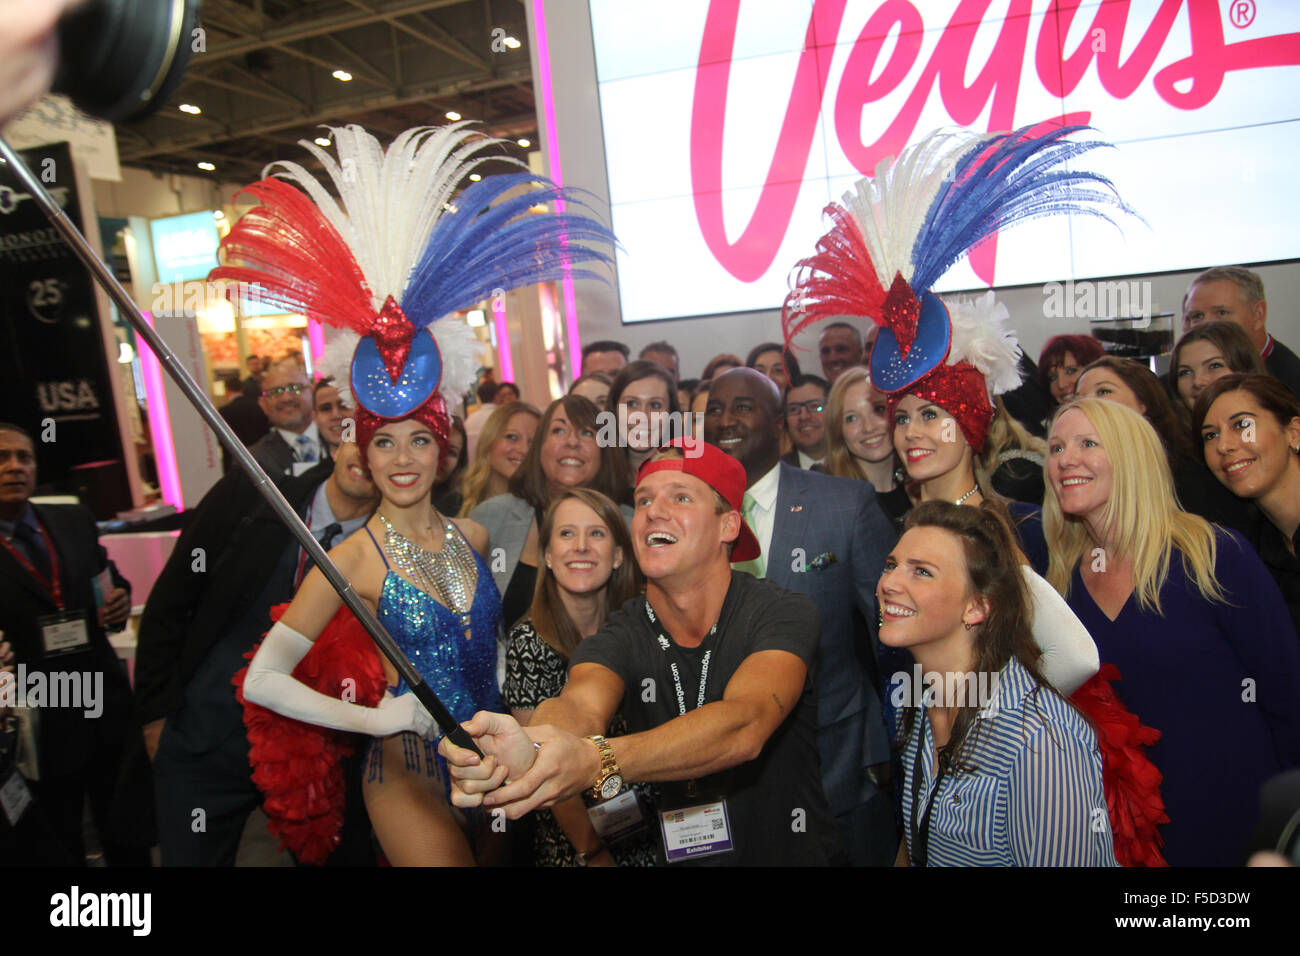 London, UK 2 November 2015. Made In Chelsea's Jamie Laing poses with members of the Las Vegas exhibition stand for a selfie photoshoot at the World Travel Market 2015. Credit:  david mbiyu/Alamy Live News Stock Photo